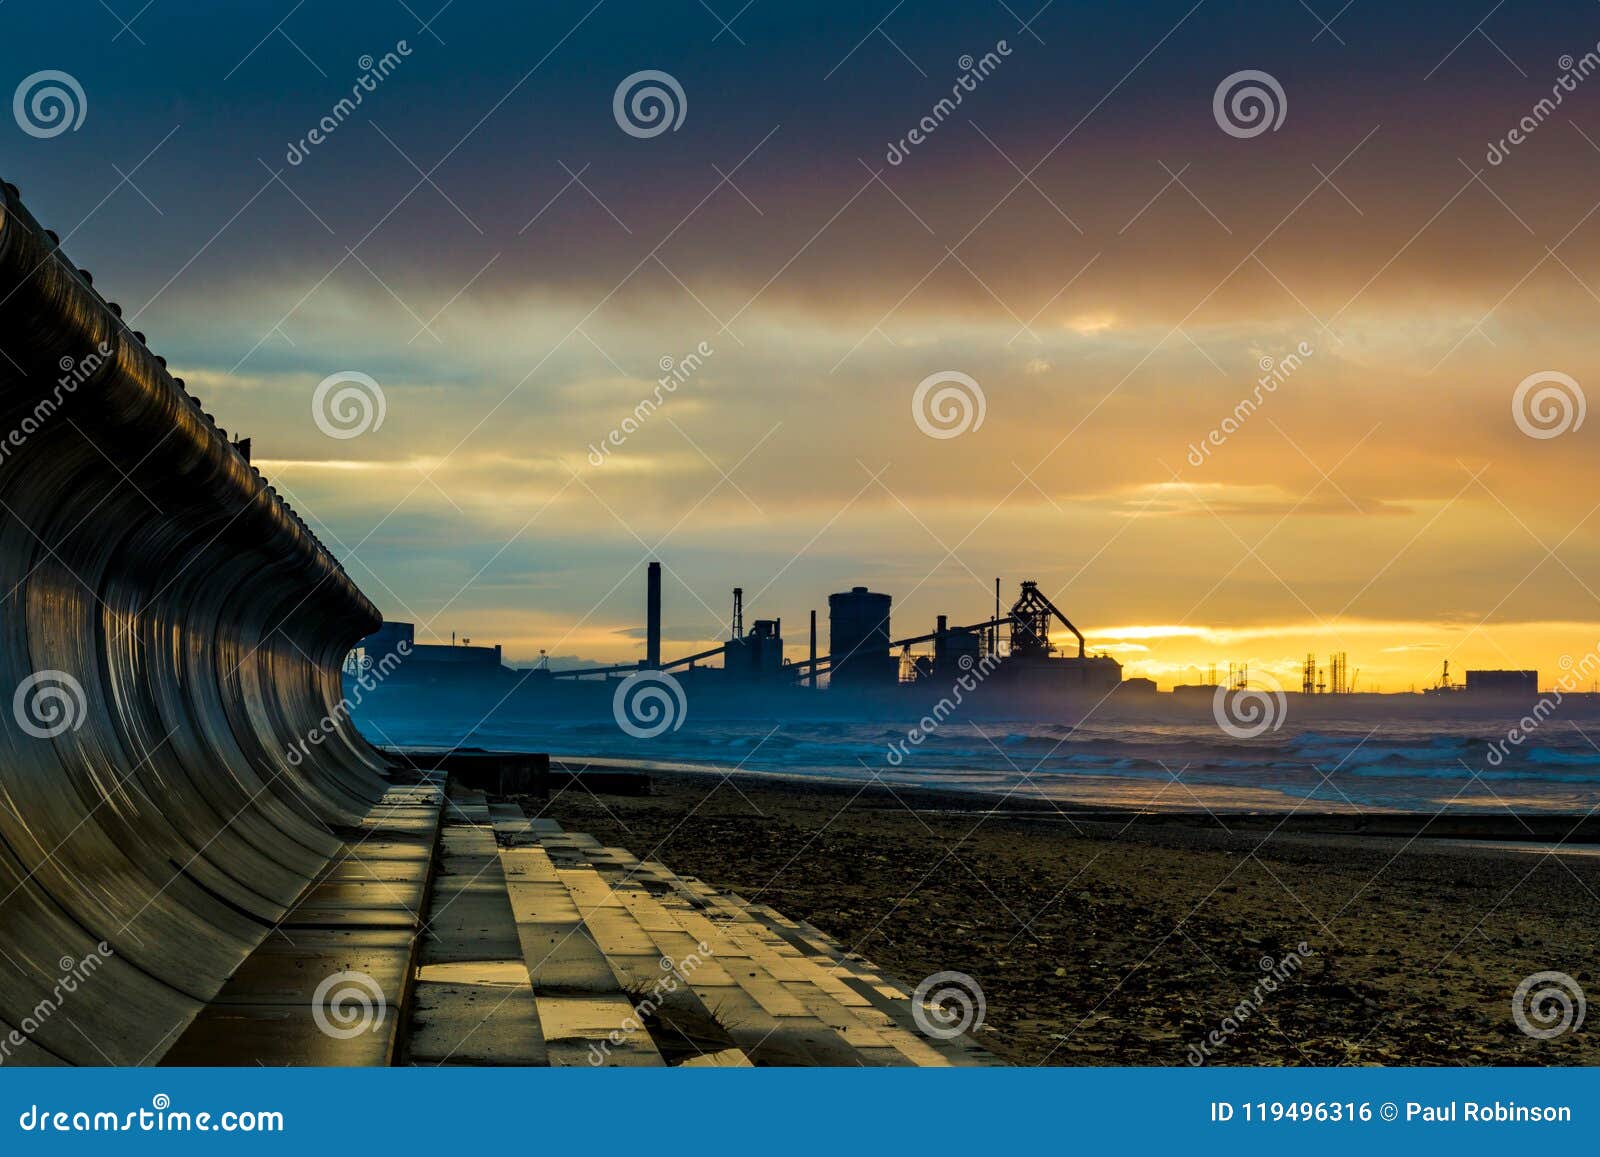 redcar beach at sunset. industrial background.